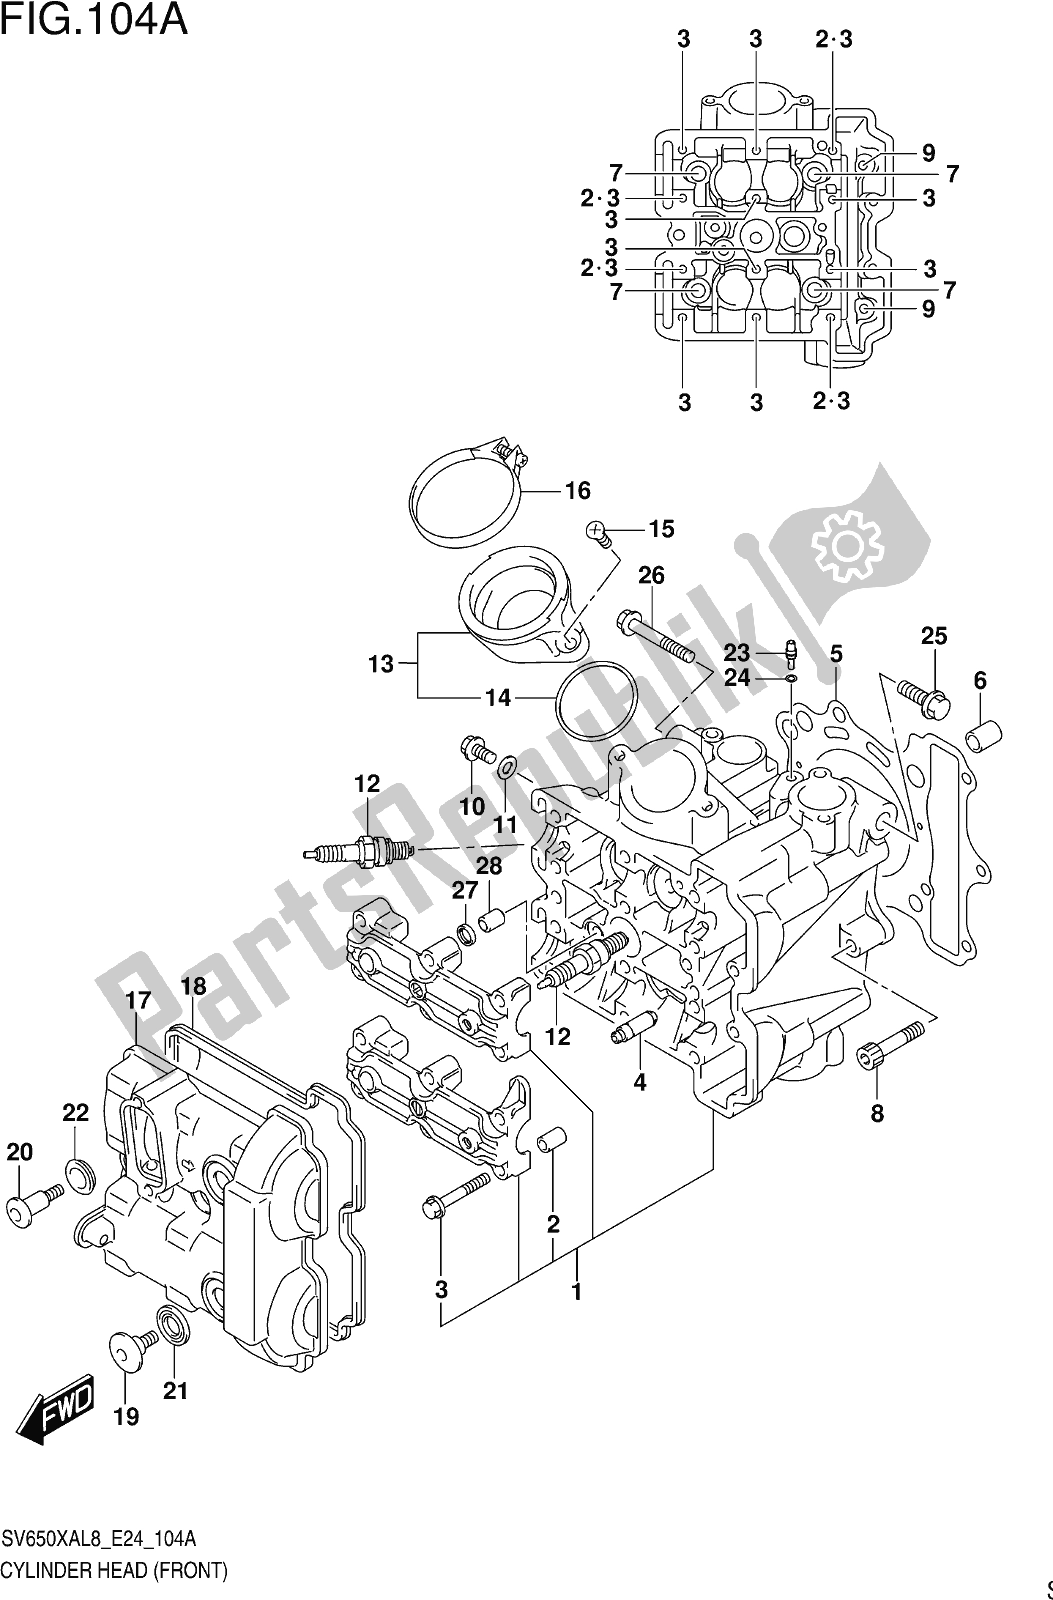 All parts for the Fig. 104a Cylinder Head (front) of the Suzuki SV 650 XA 2018